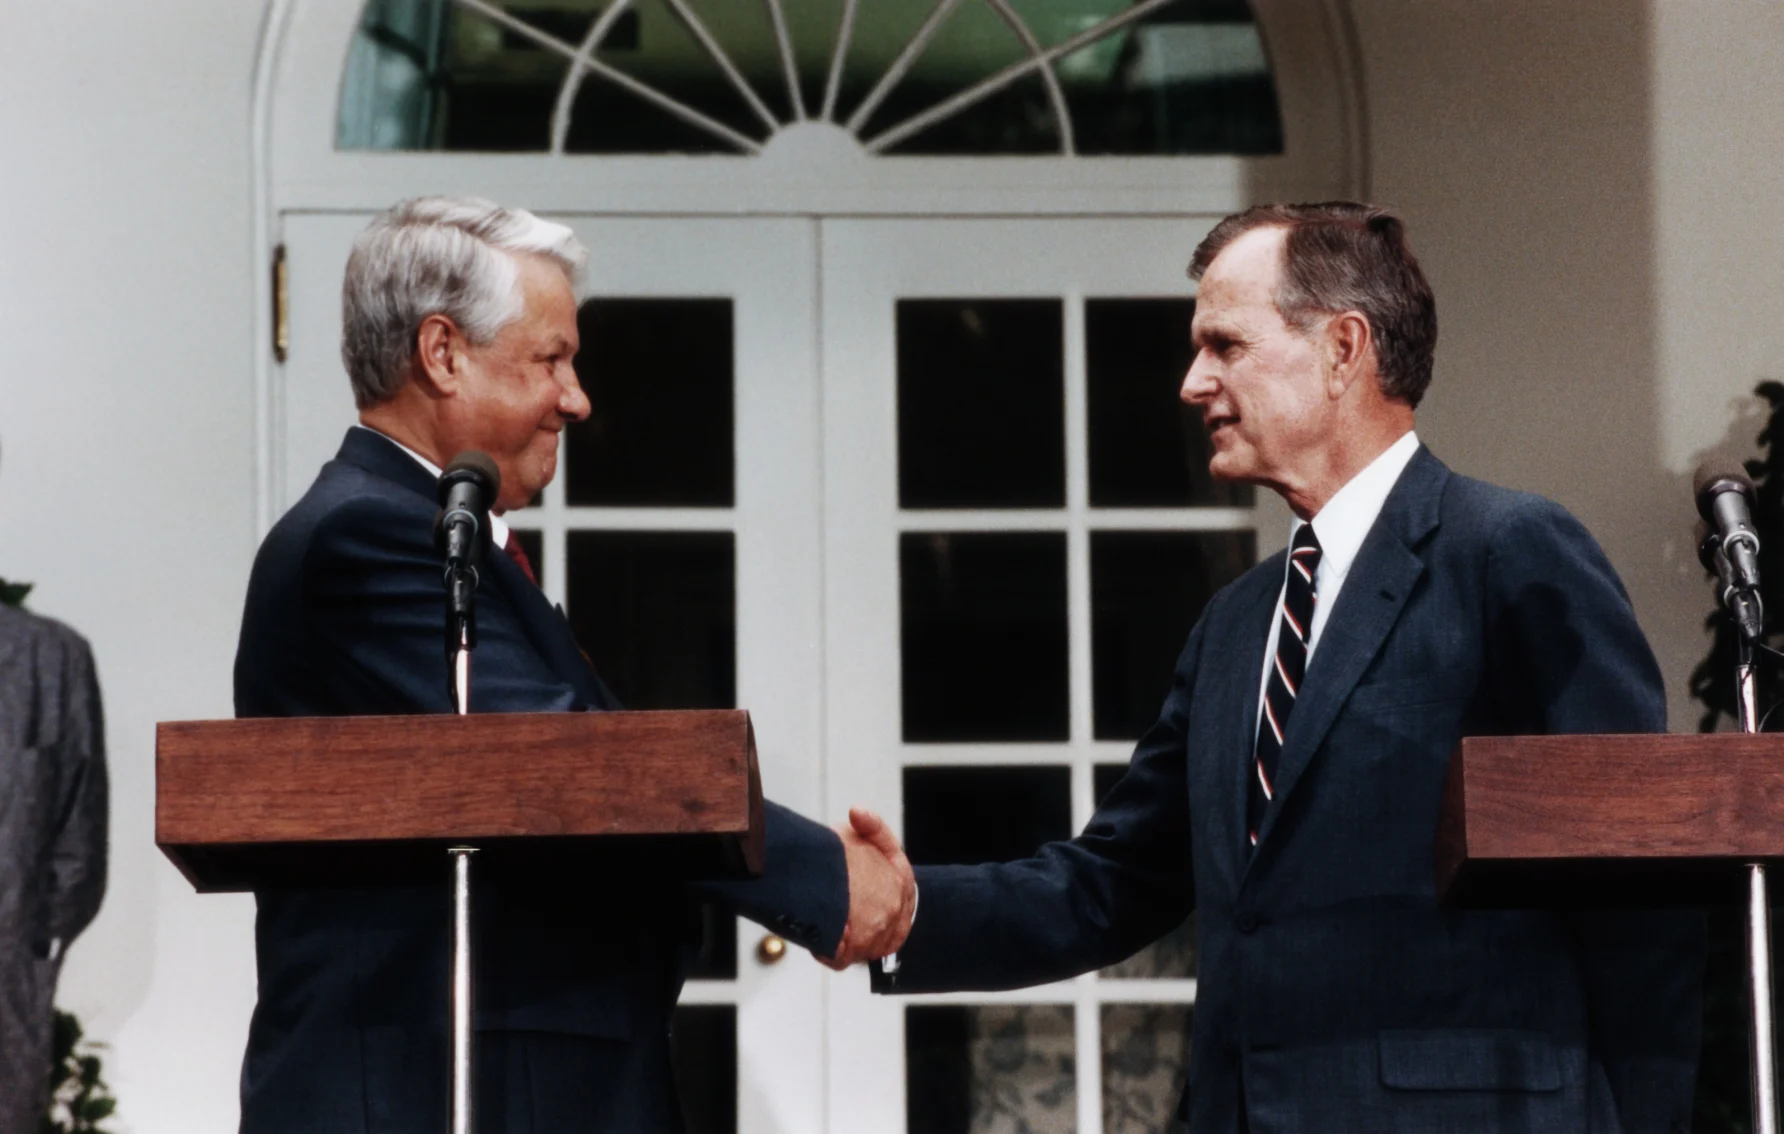 Bush and Russian President Boris Yeltsin have a press conference in the Rose Garden – Source: George H.W. Bush Library